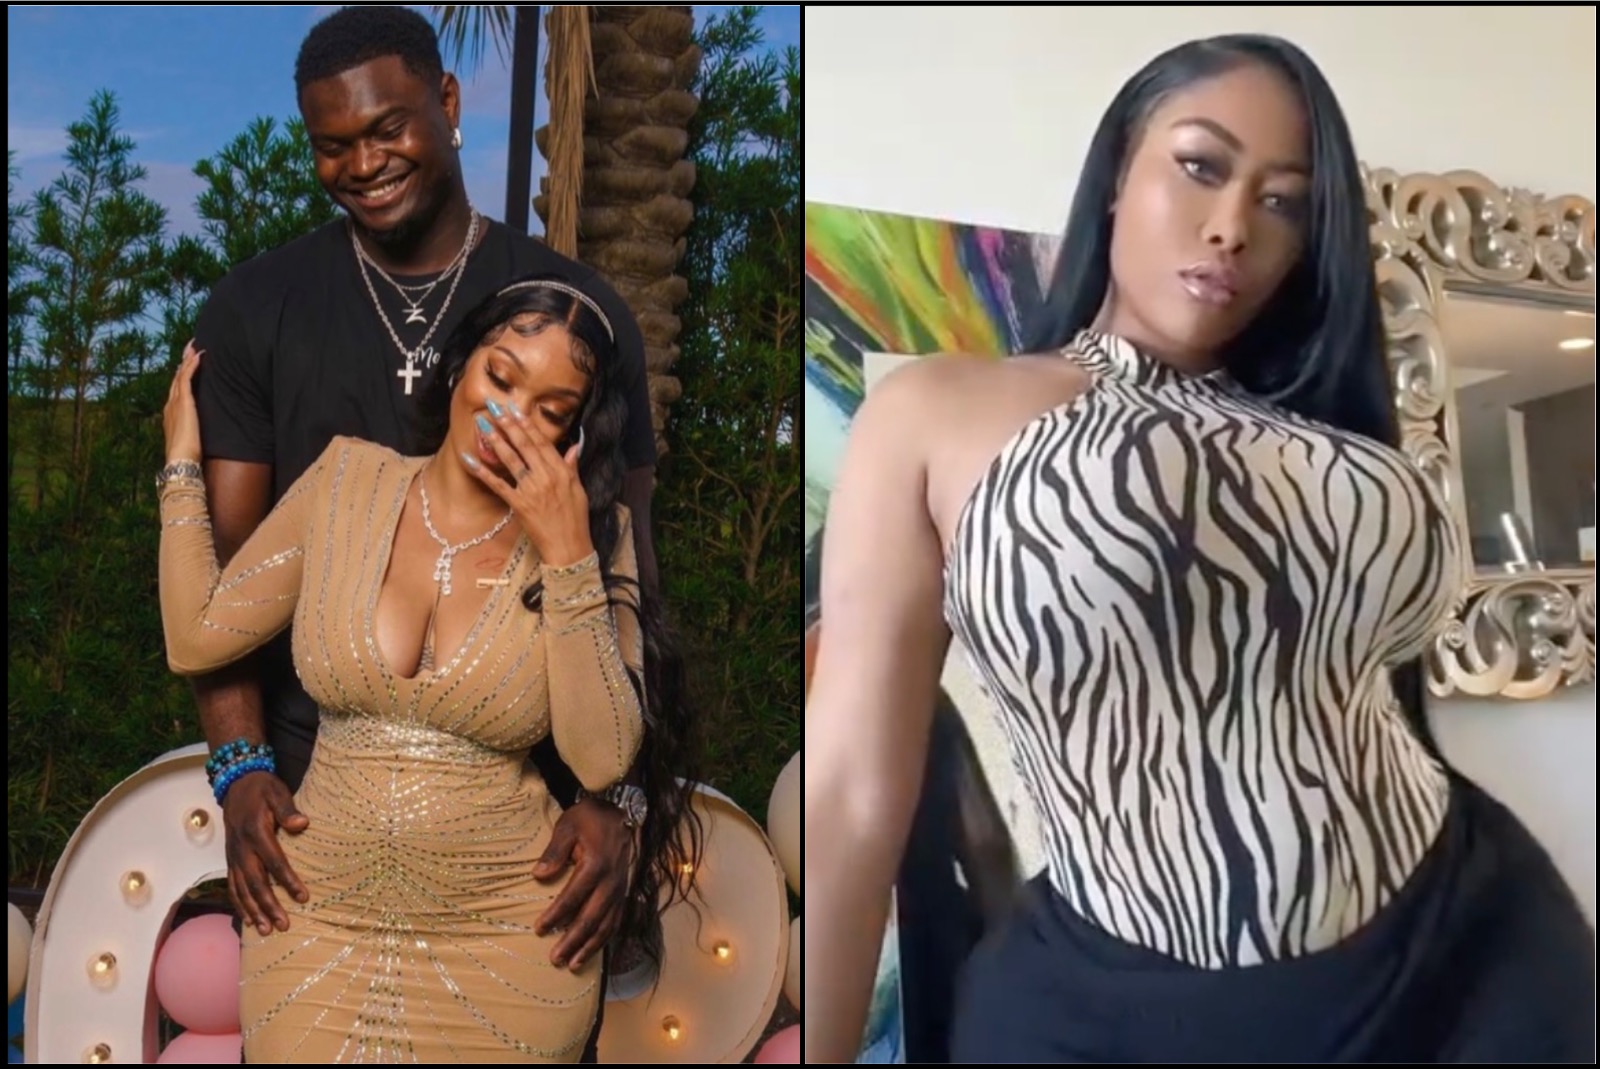 IG Model Moriah Mills Exposes Zion Williamson After He Announced He's  Having Baby With Ahkeema - BlackSportsOnline